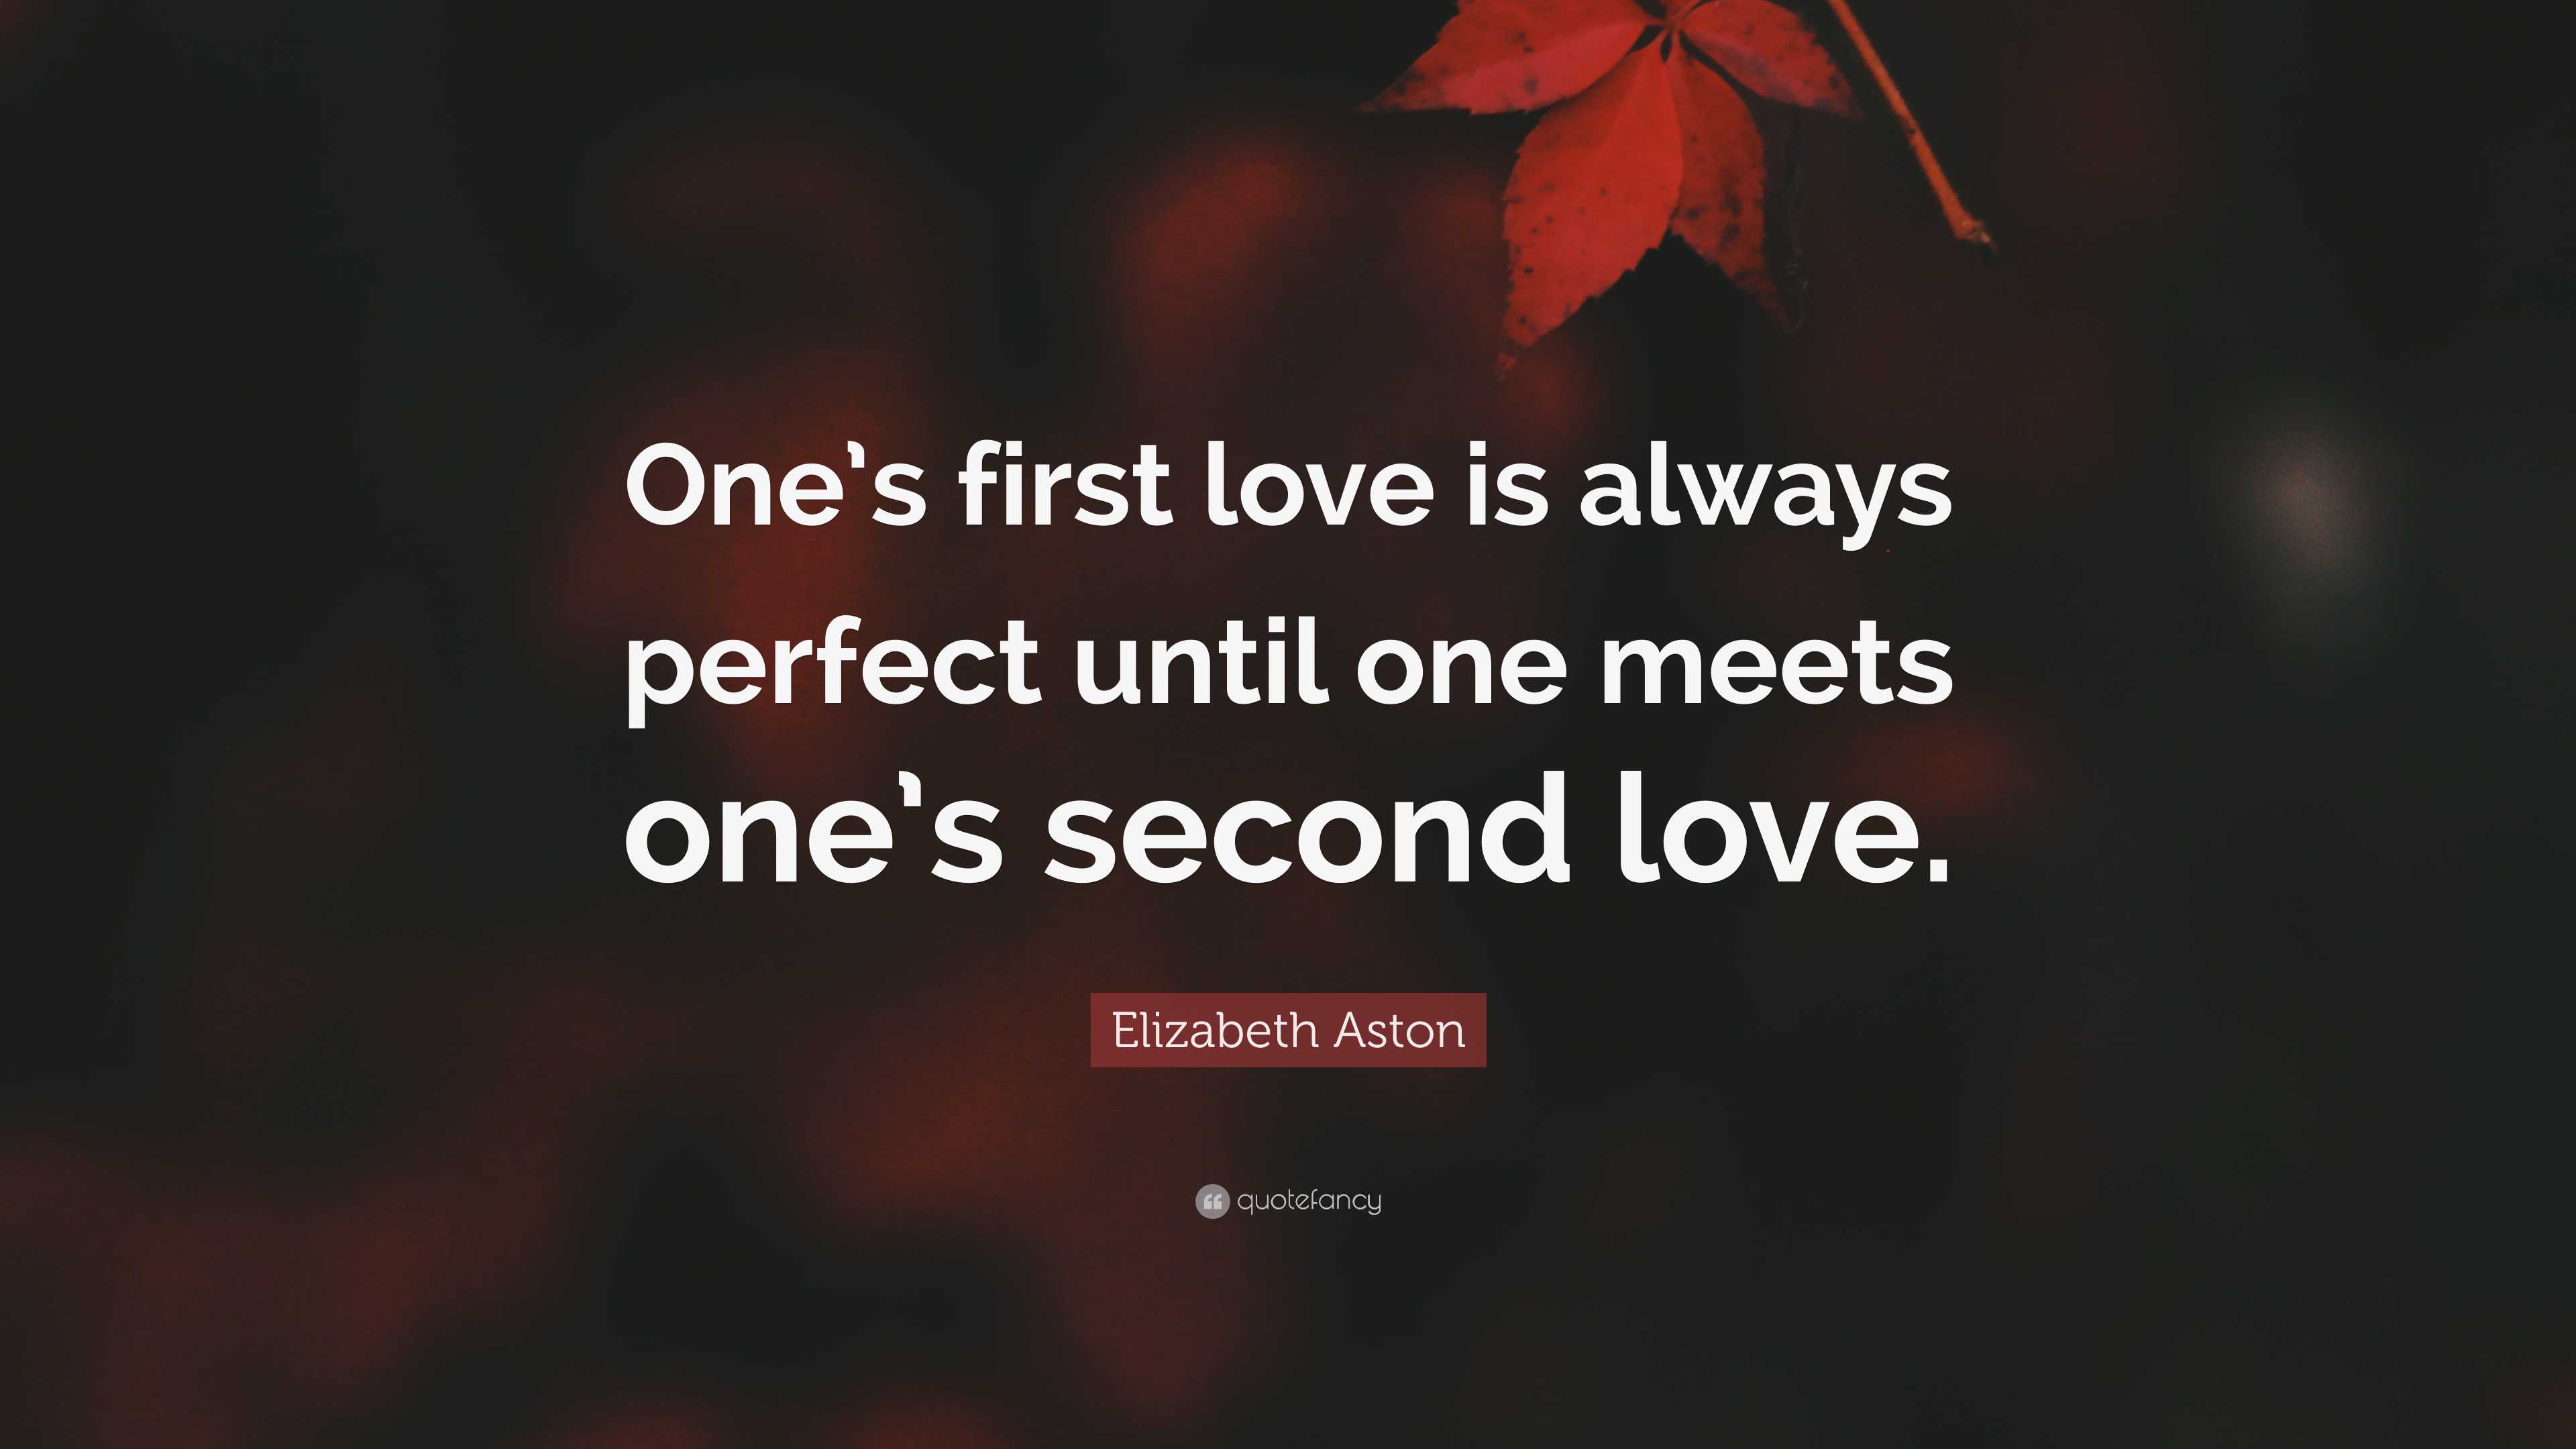 Elizabeth Aston Quote: “One's first love is always perfect until one meets  one's second love.”